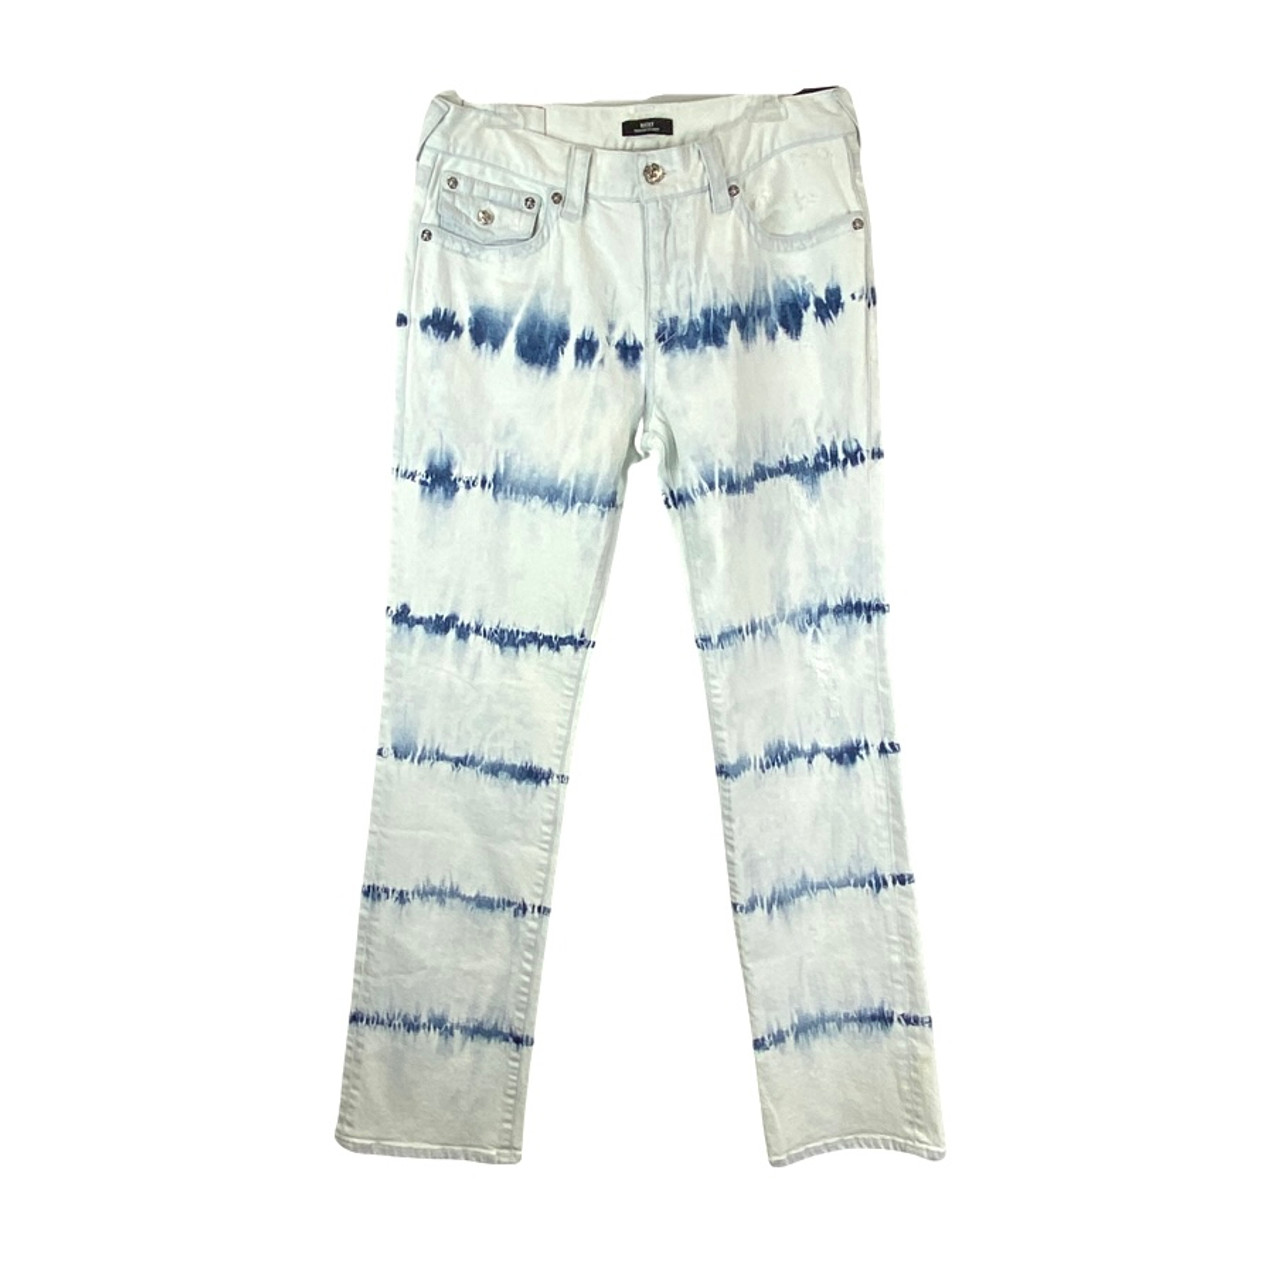 True Religion Ricky Relaxed Straight Tie Dye Jeans